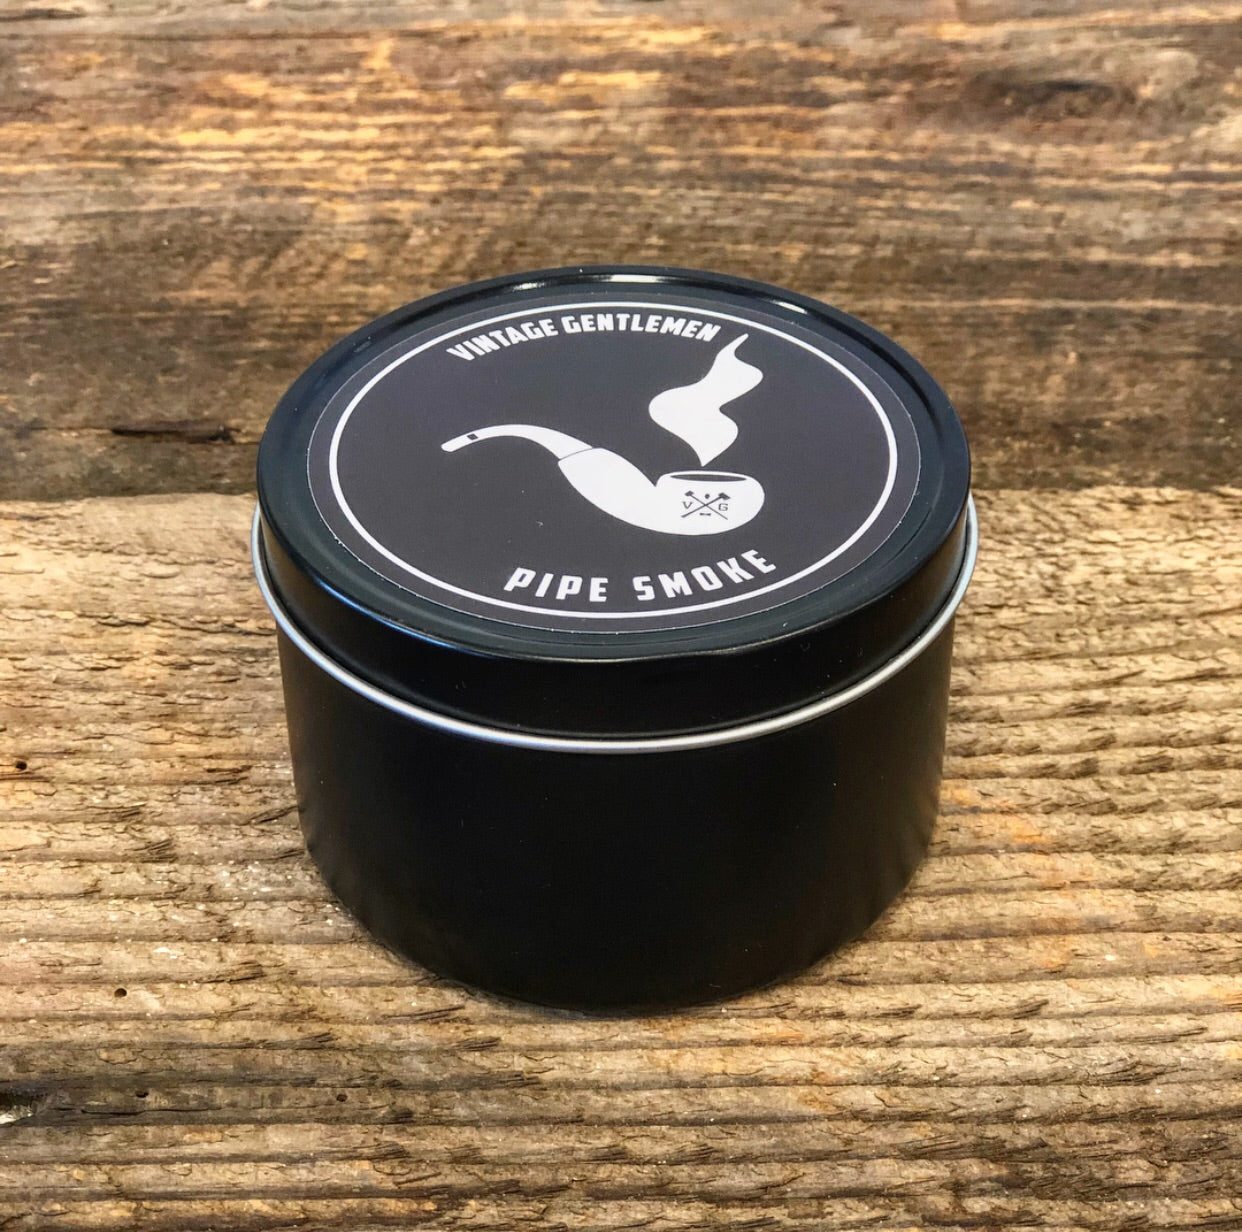 “Pipe Smoke” Soy Candle